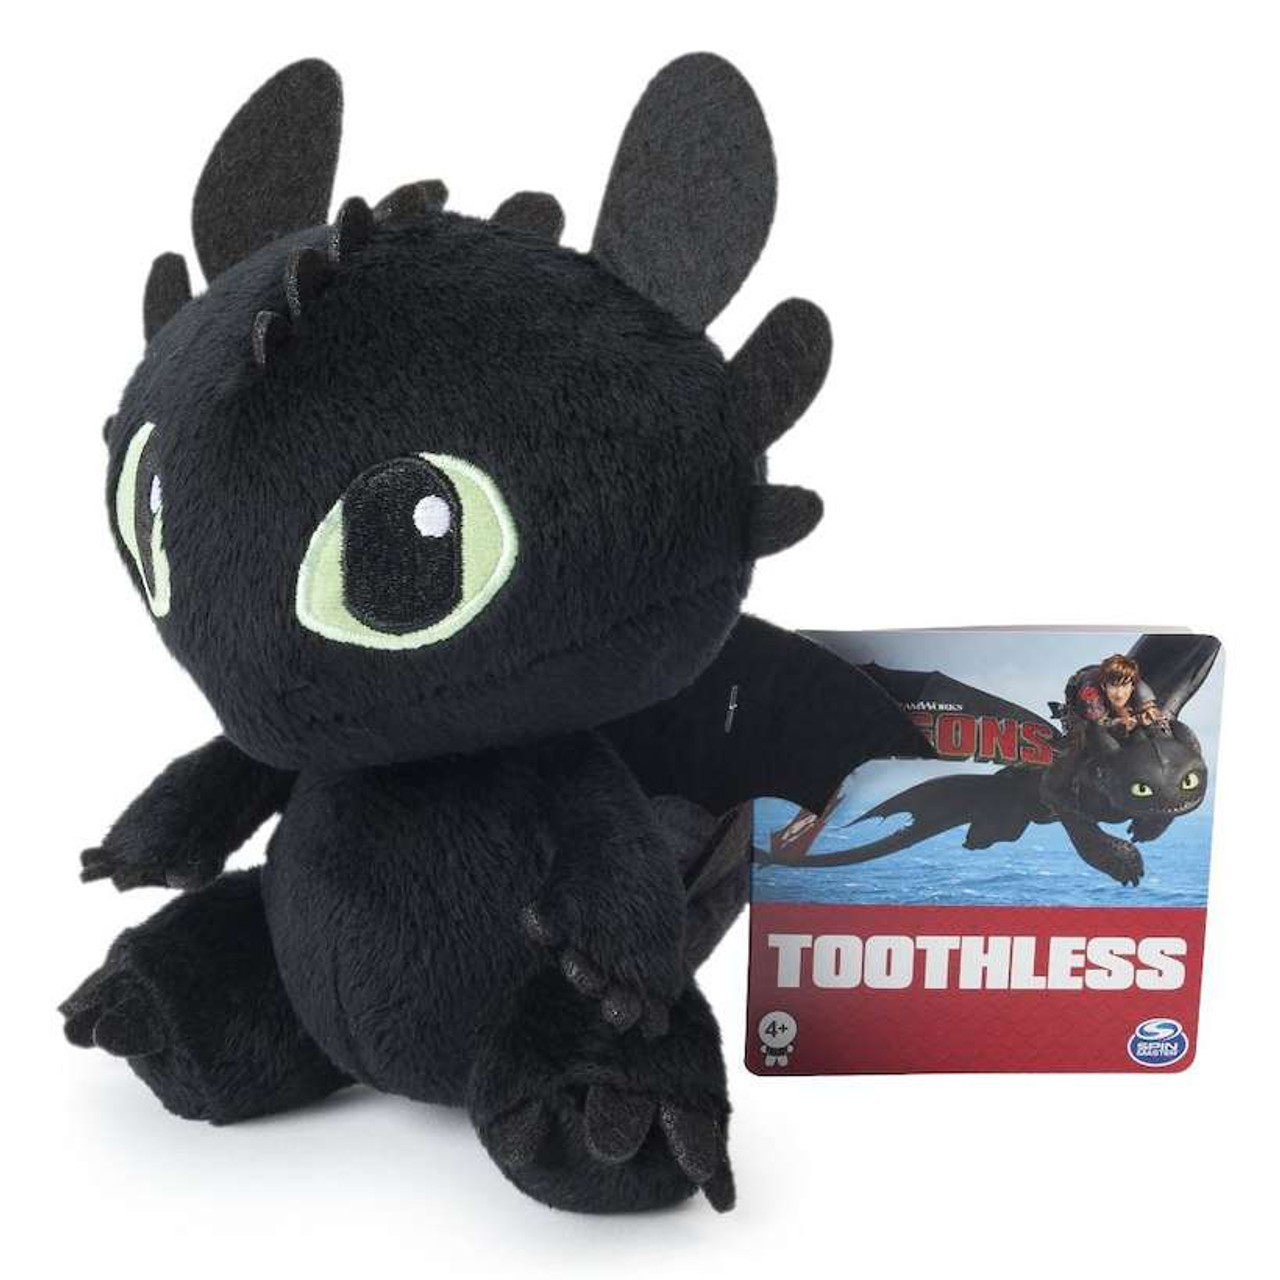 How to Train Your Dragon Dragons Toothless 8 Plush Spin Master - ToyWiz